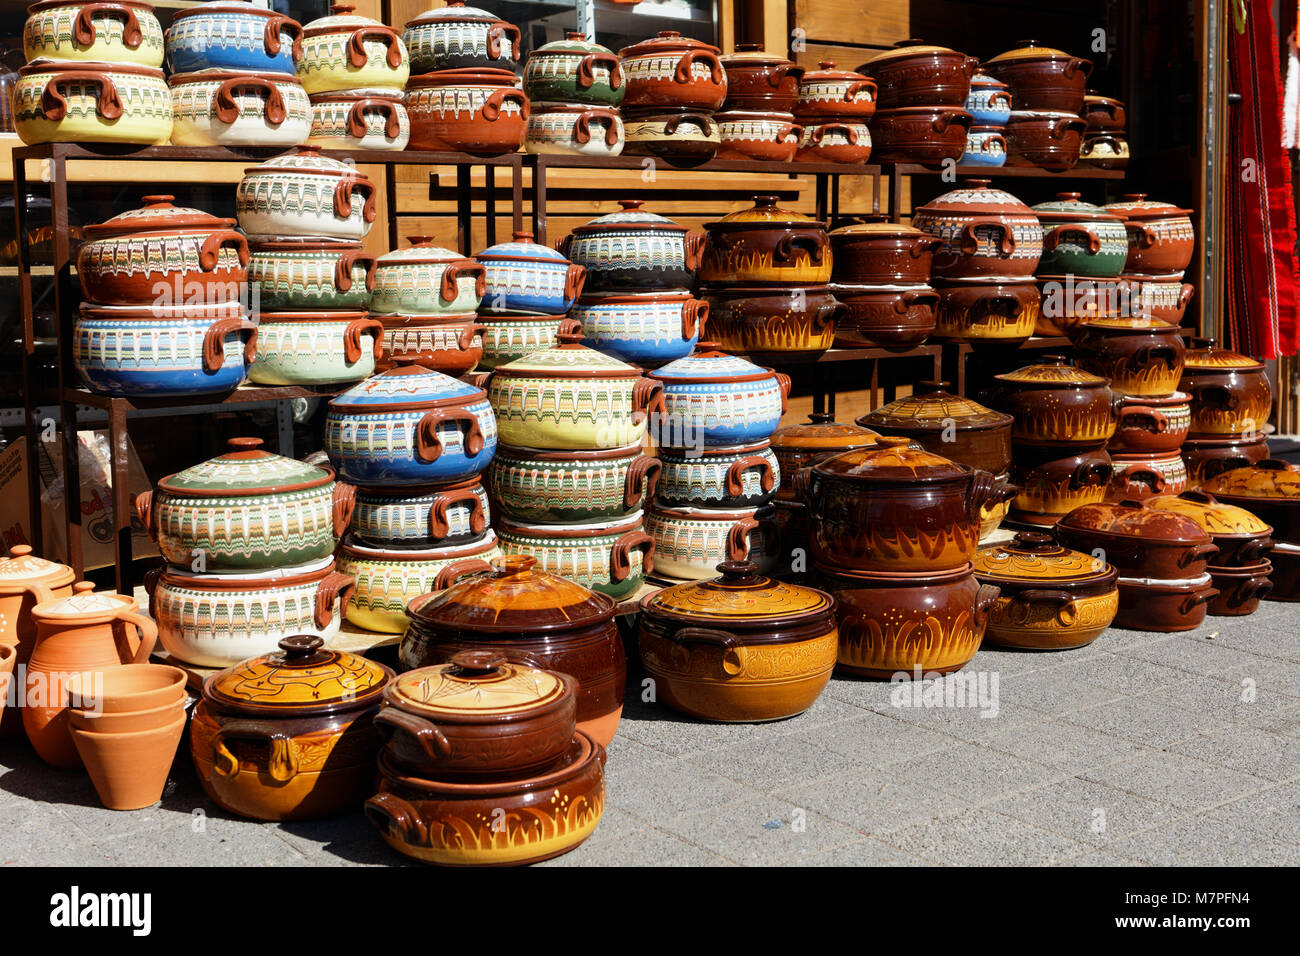 Sofia, Bulgaria - March 5, 2016: Assortment of ceramic pots at the Women's market. Also known as Zhensky pazar, it is the largest and busiest market i Stock Photo